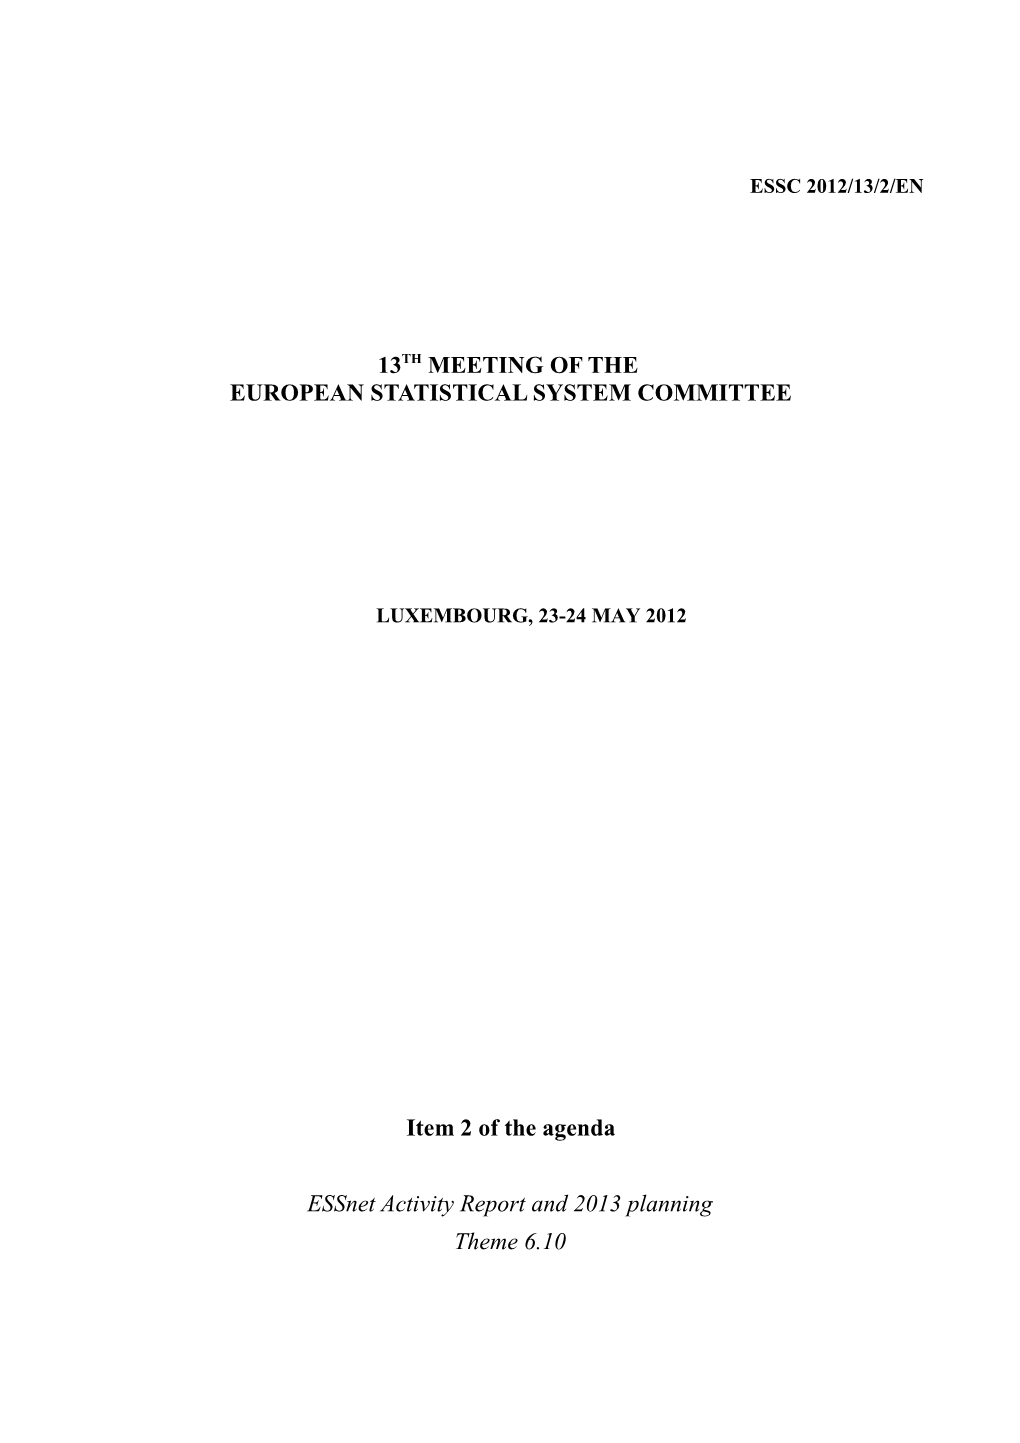 13Thmeeting of the European Statistical System Committee